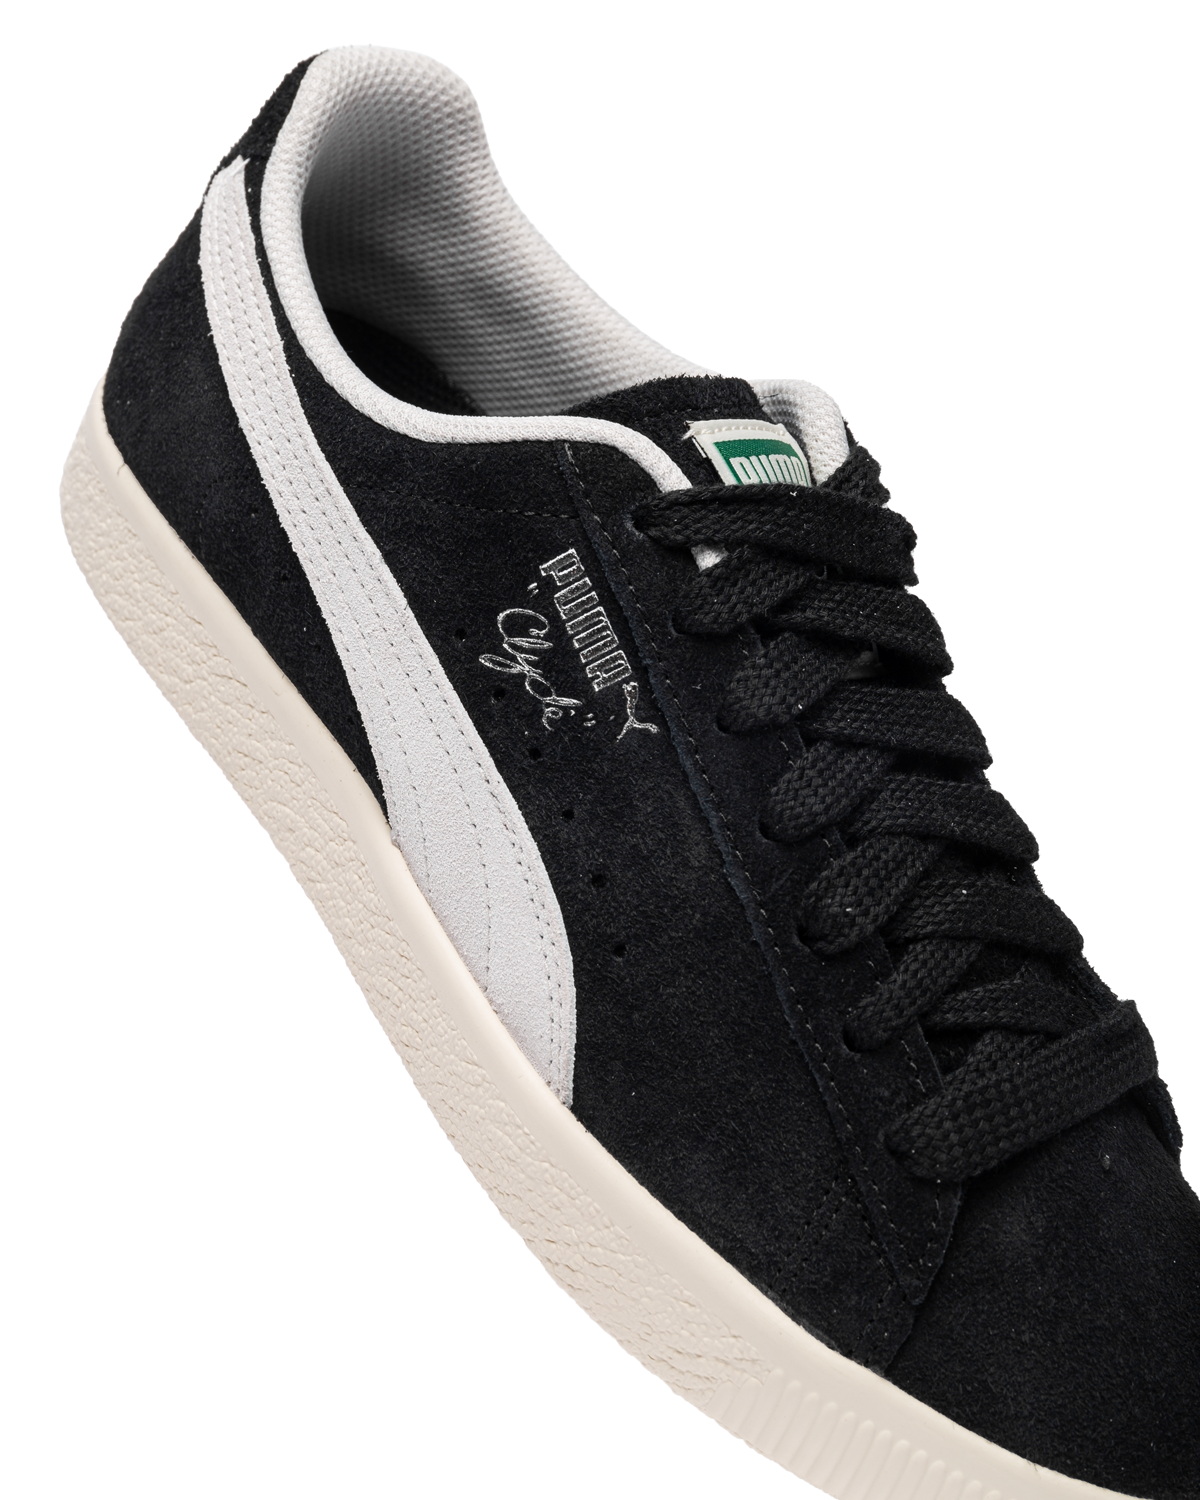 Clyde Hairy Suede Puma Black/Frosted Ivory